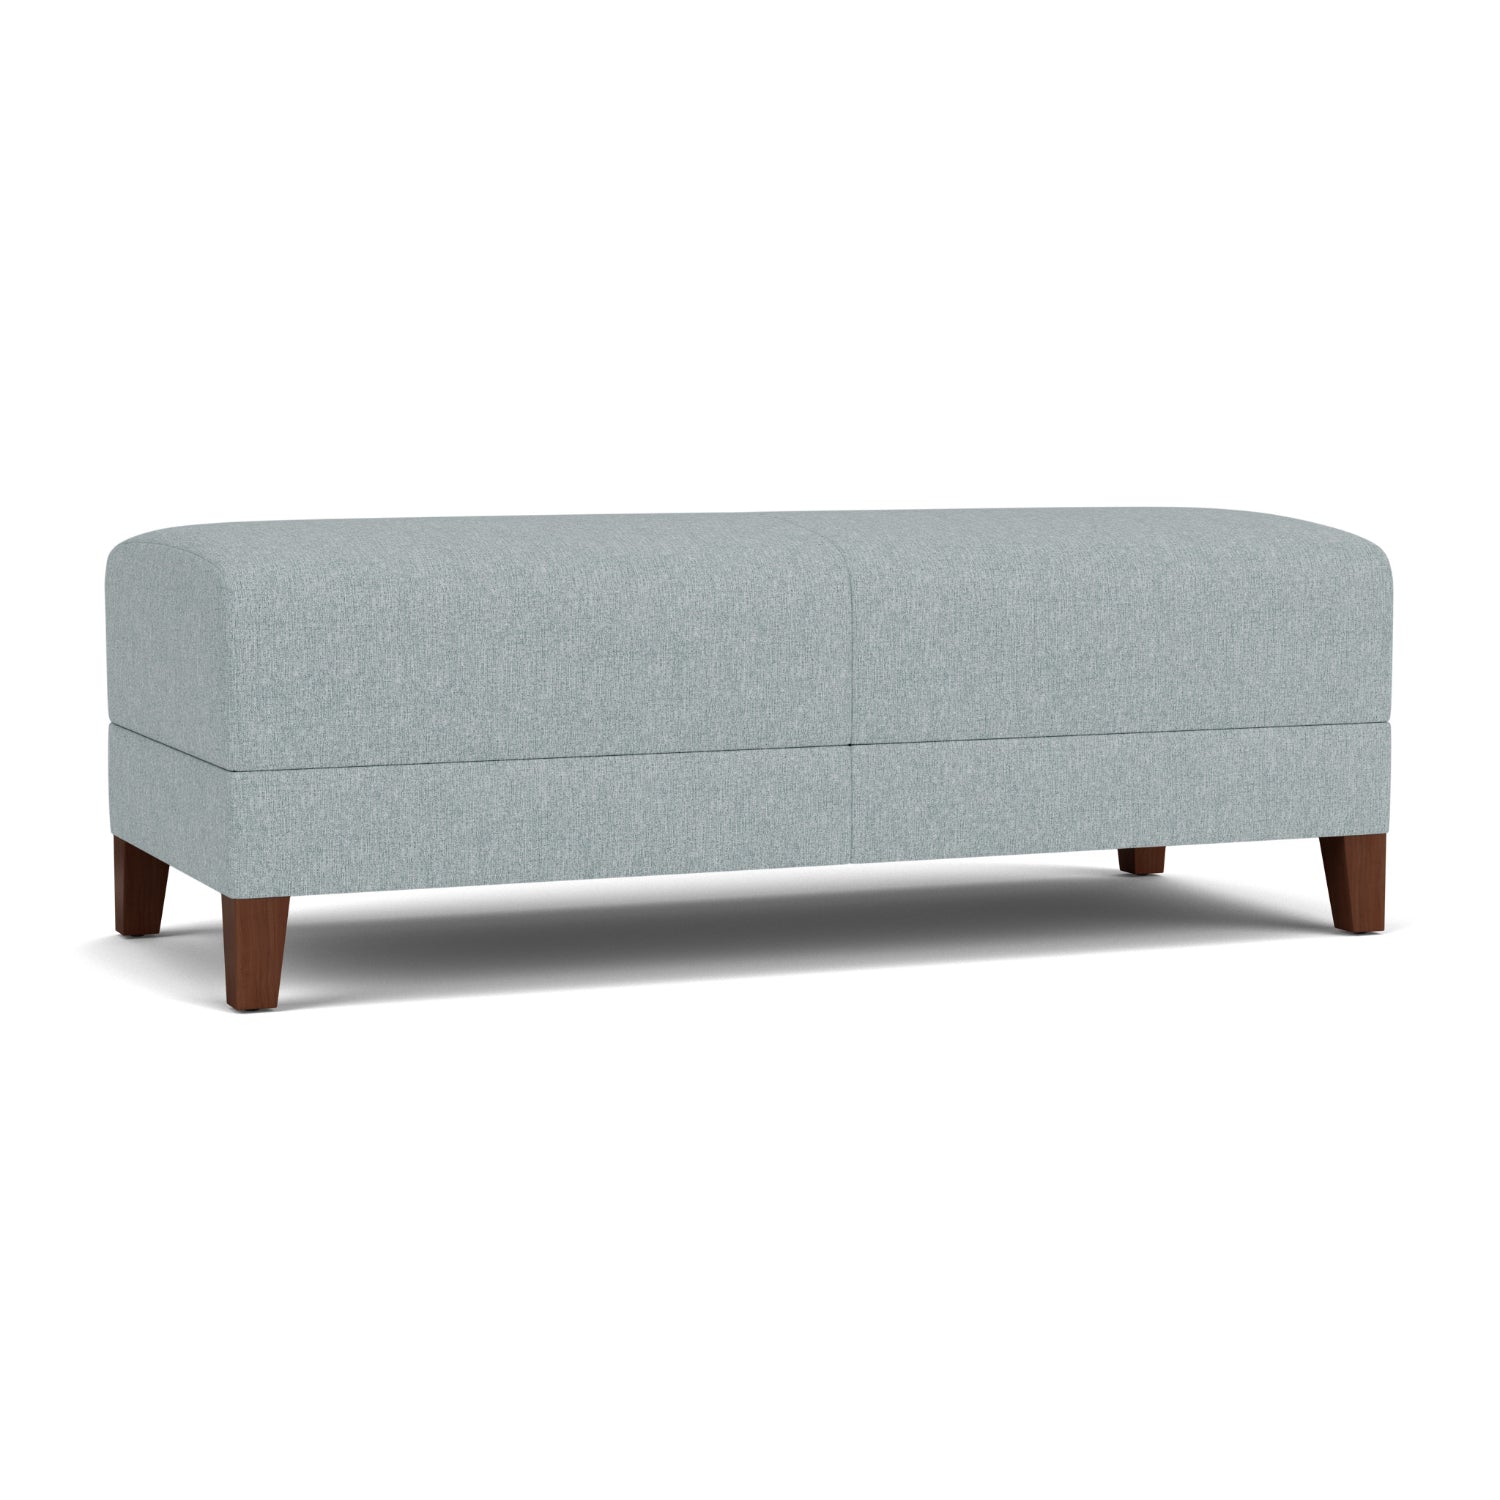 Fremont Collection Reception Seating, 2 Seat Bench, Healthcare Vinyl Upholstery, FREE SHIPPING